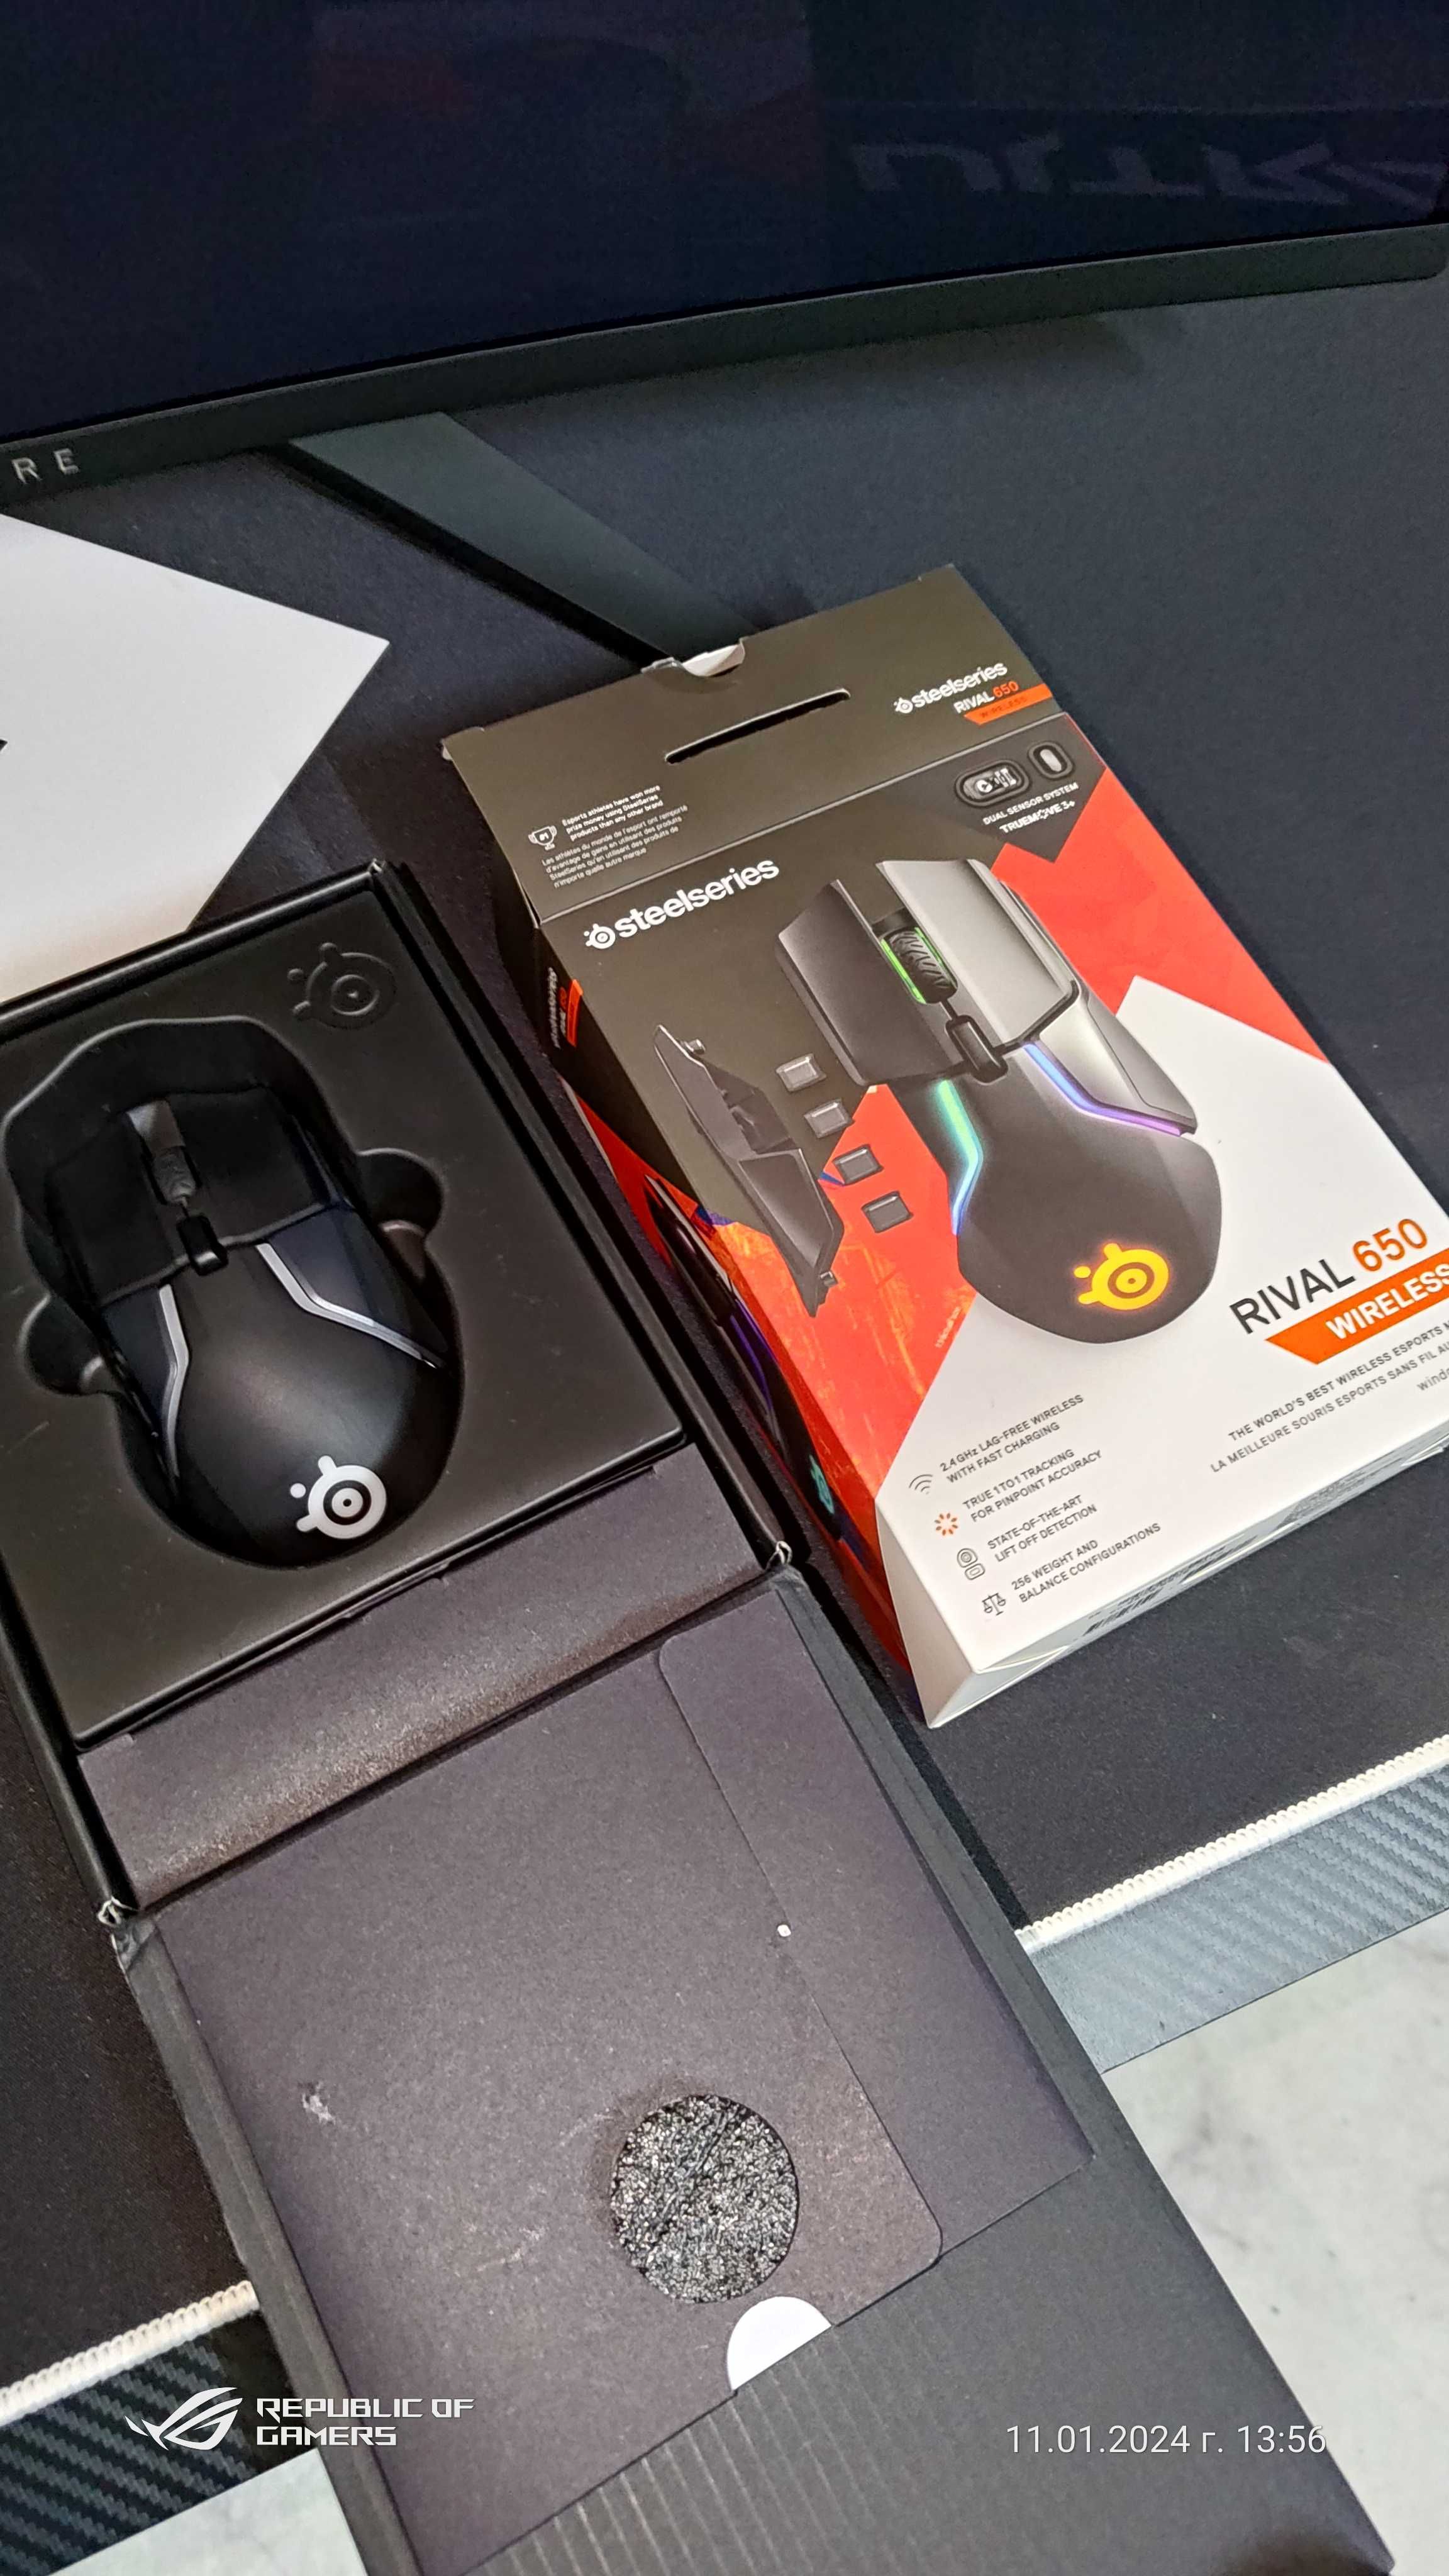 SteelSeries Rival 650 Wireless Gaming Mouse